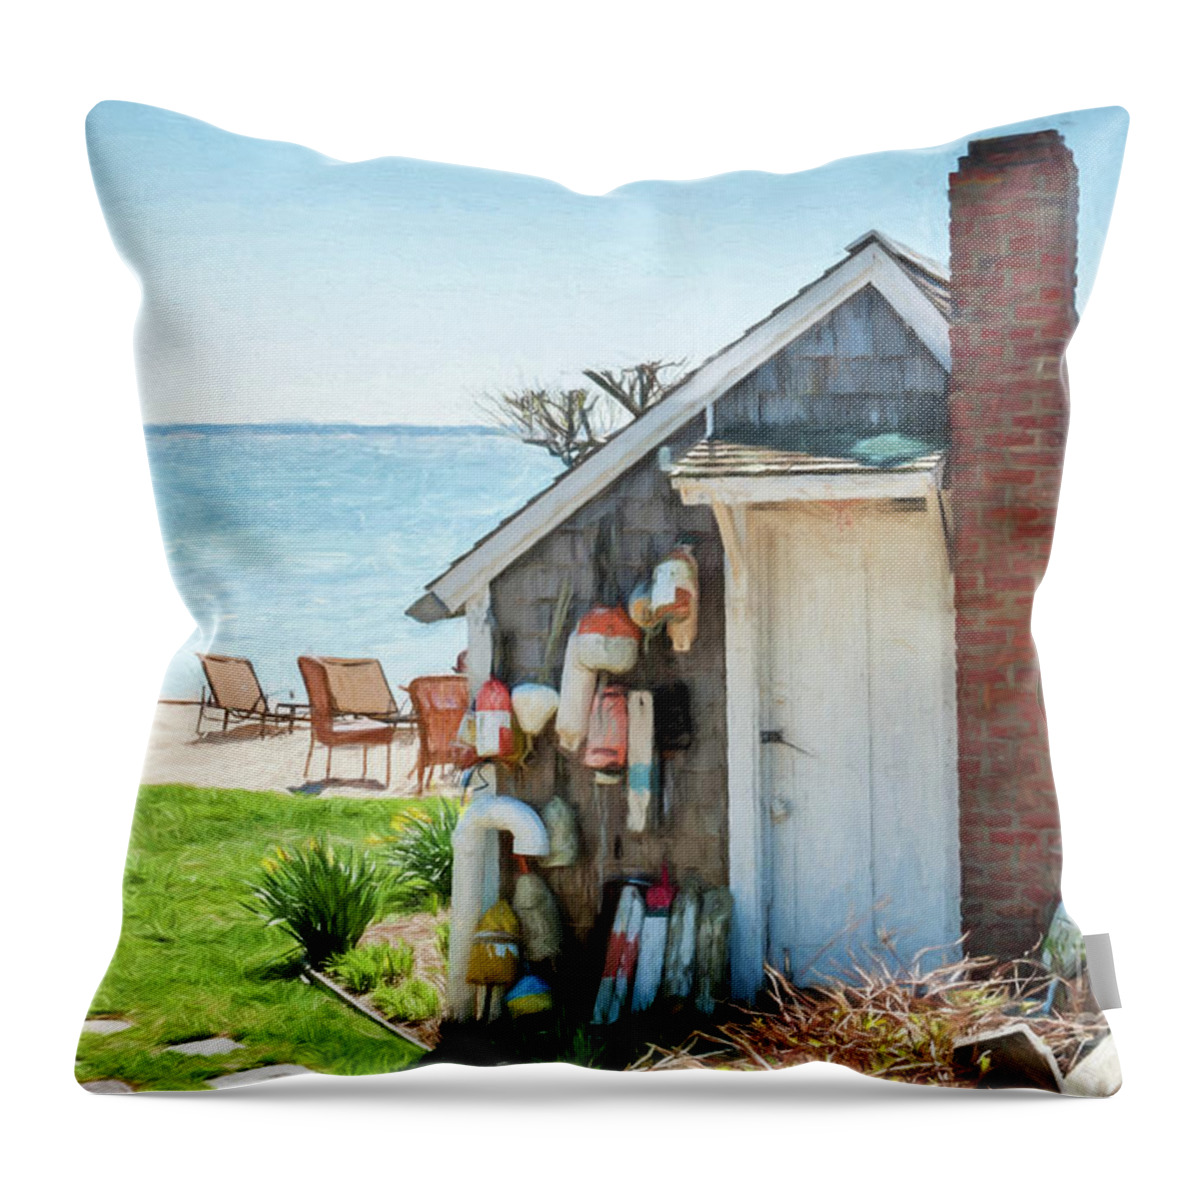 Commercial St Throw Pillow featuring the photograph Provincetown Shed by Michael James